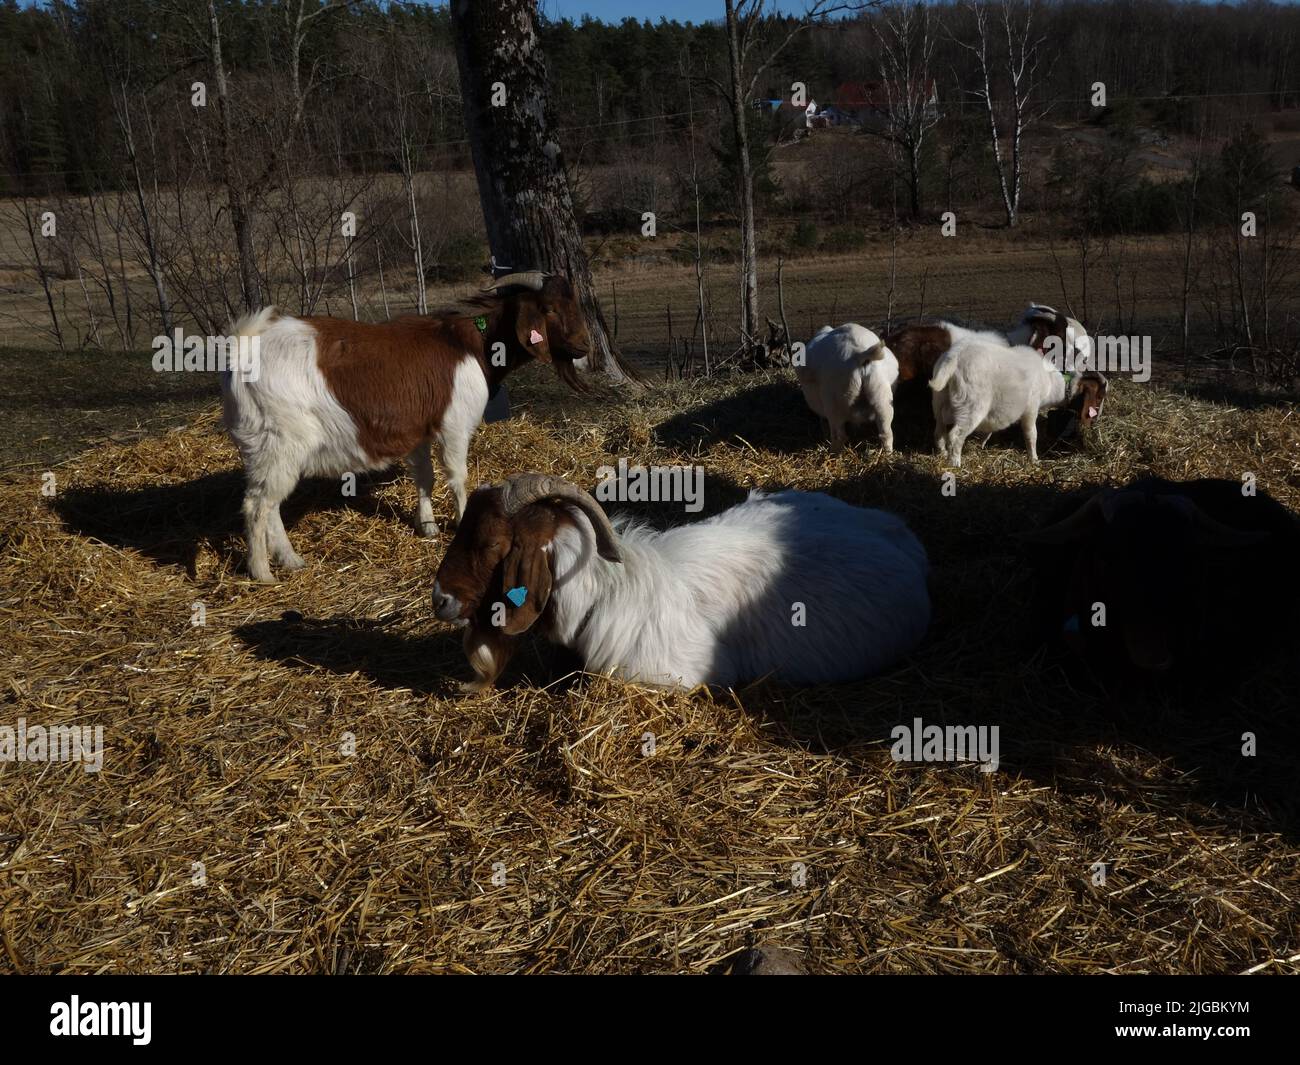 The goats enjoy themselves in the spring sun and let the days go by. Stock Photo